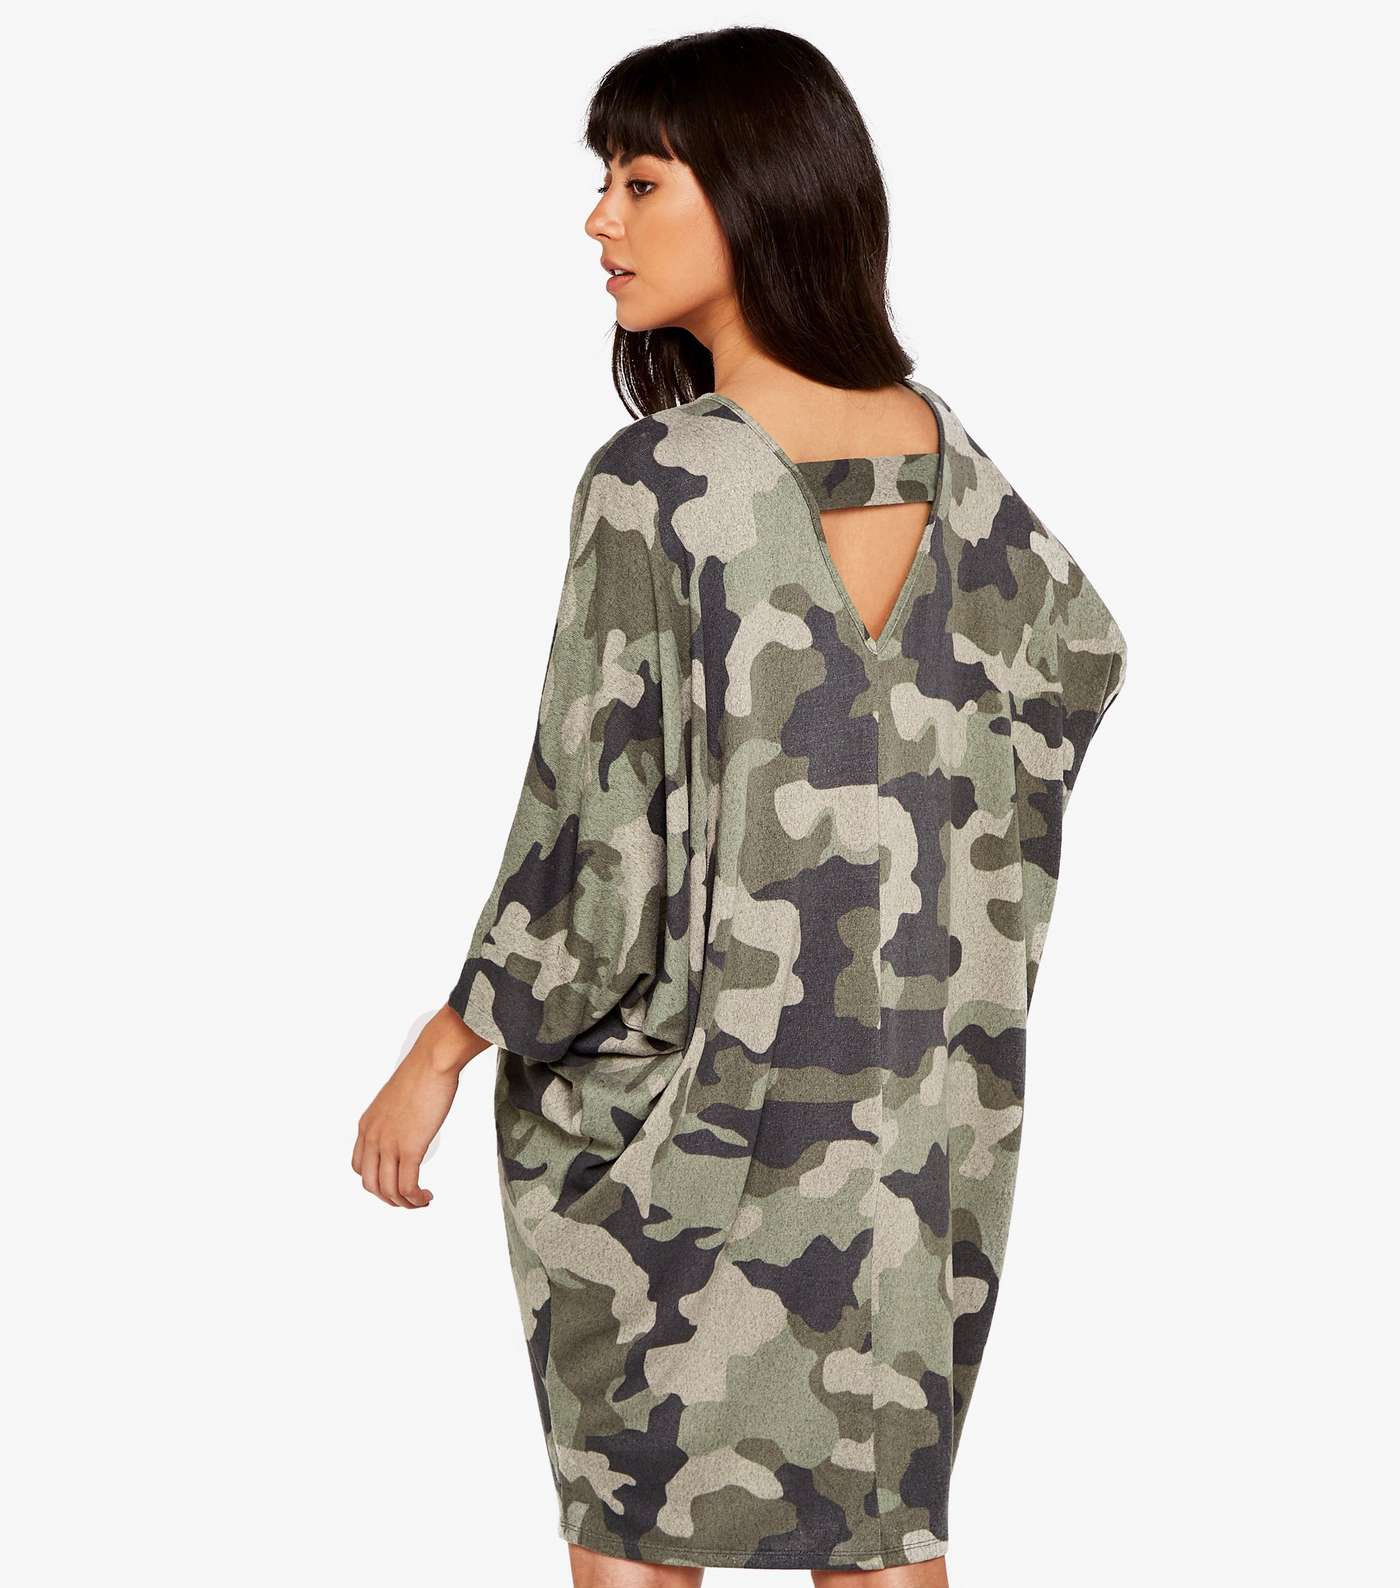 Apricot Green Camo Cocoon Dress Image 3